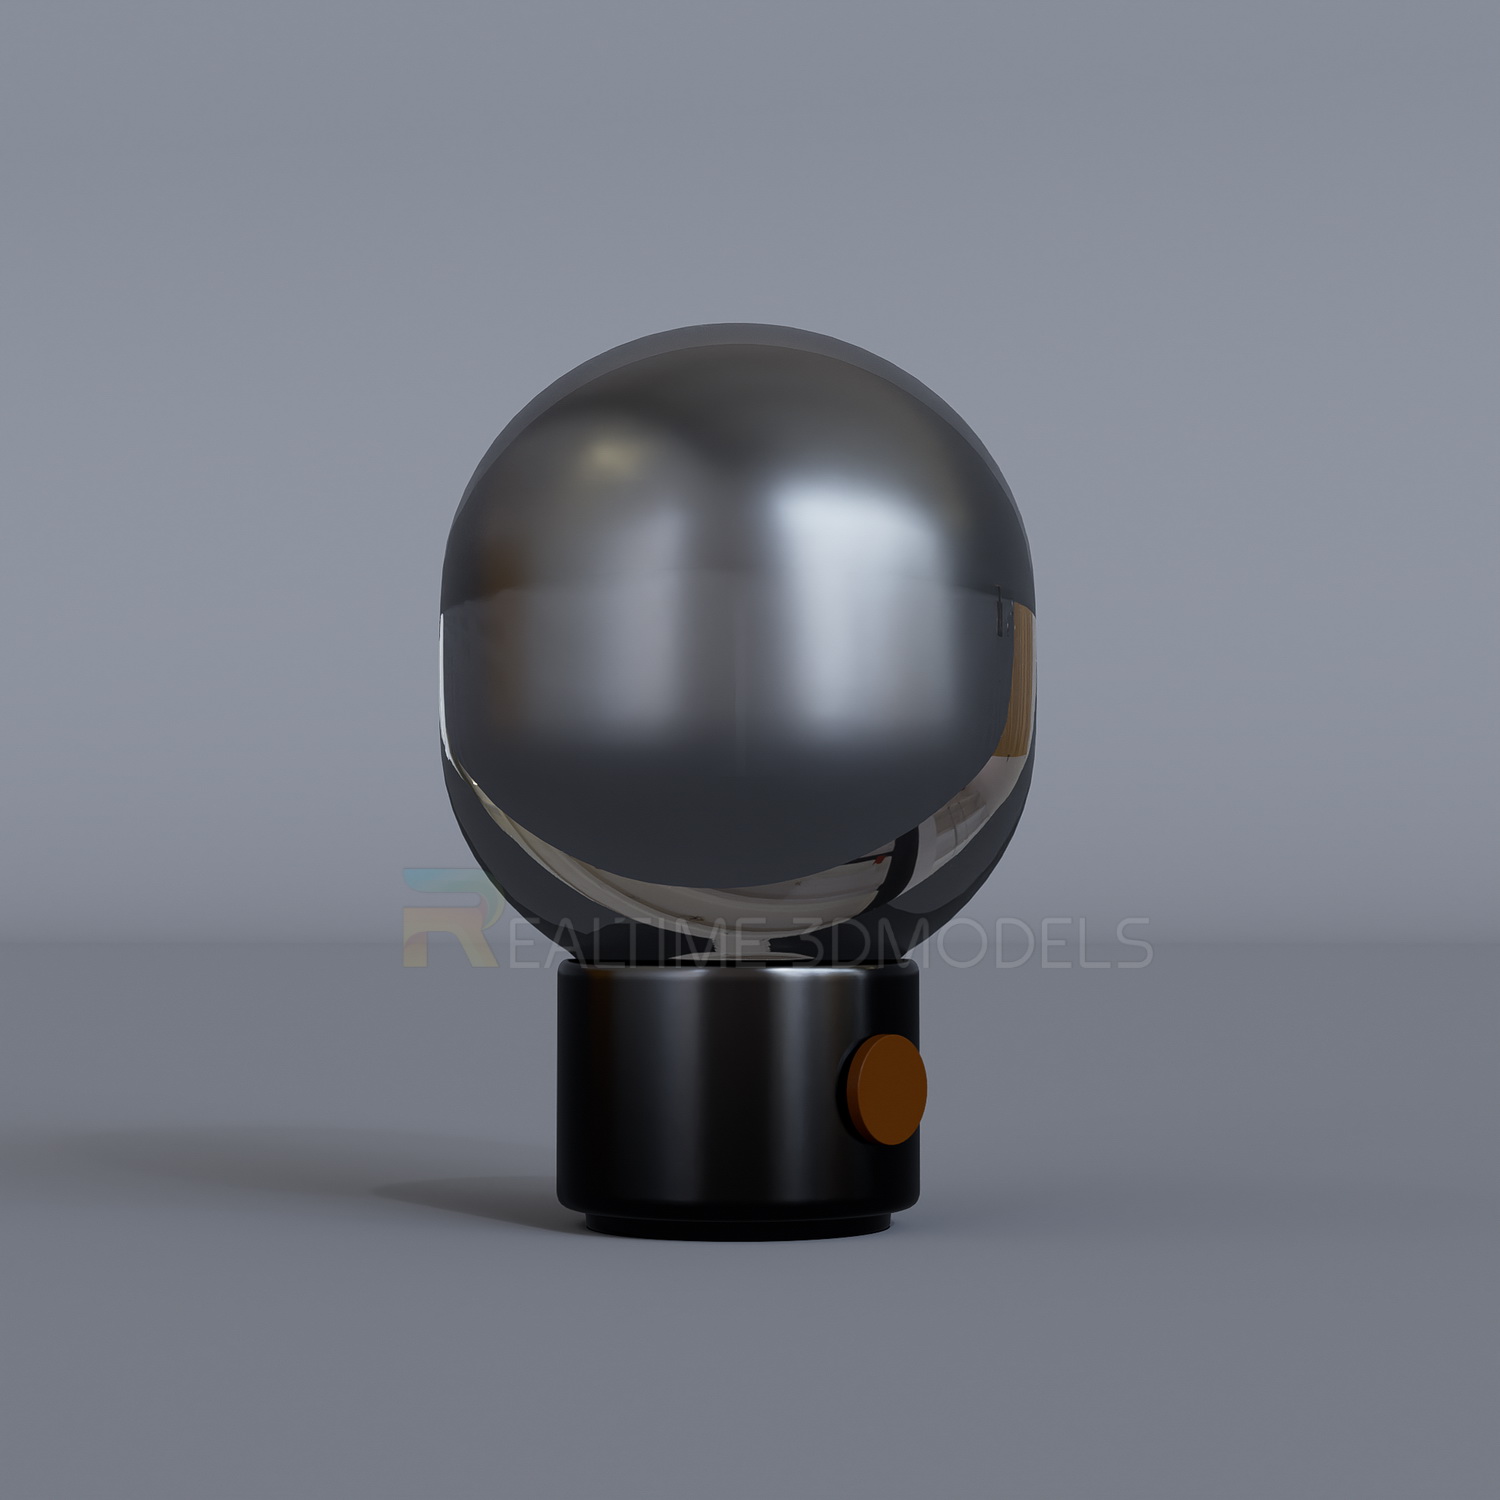 Realtime3d-01090